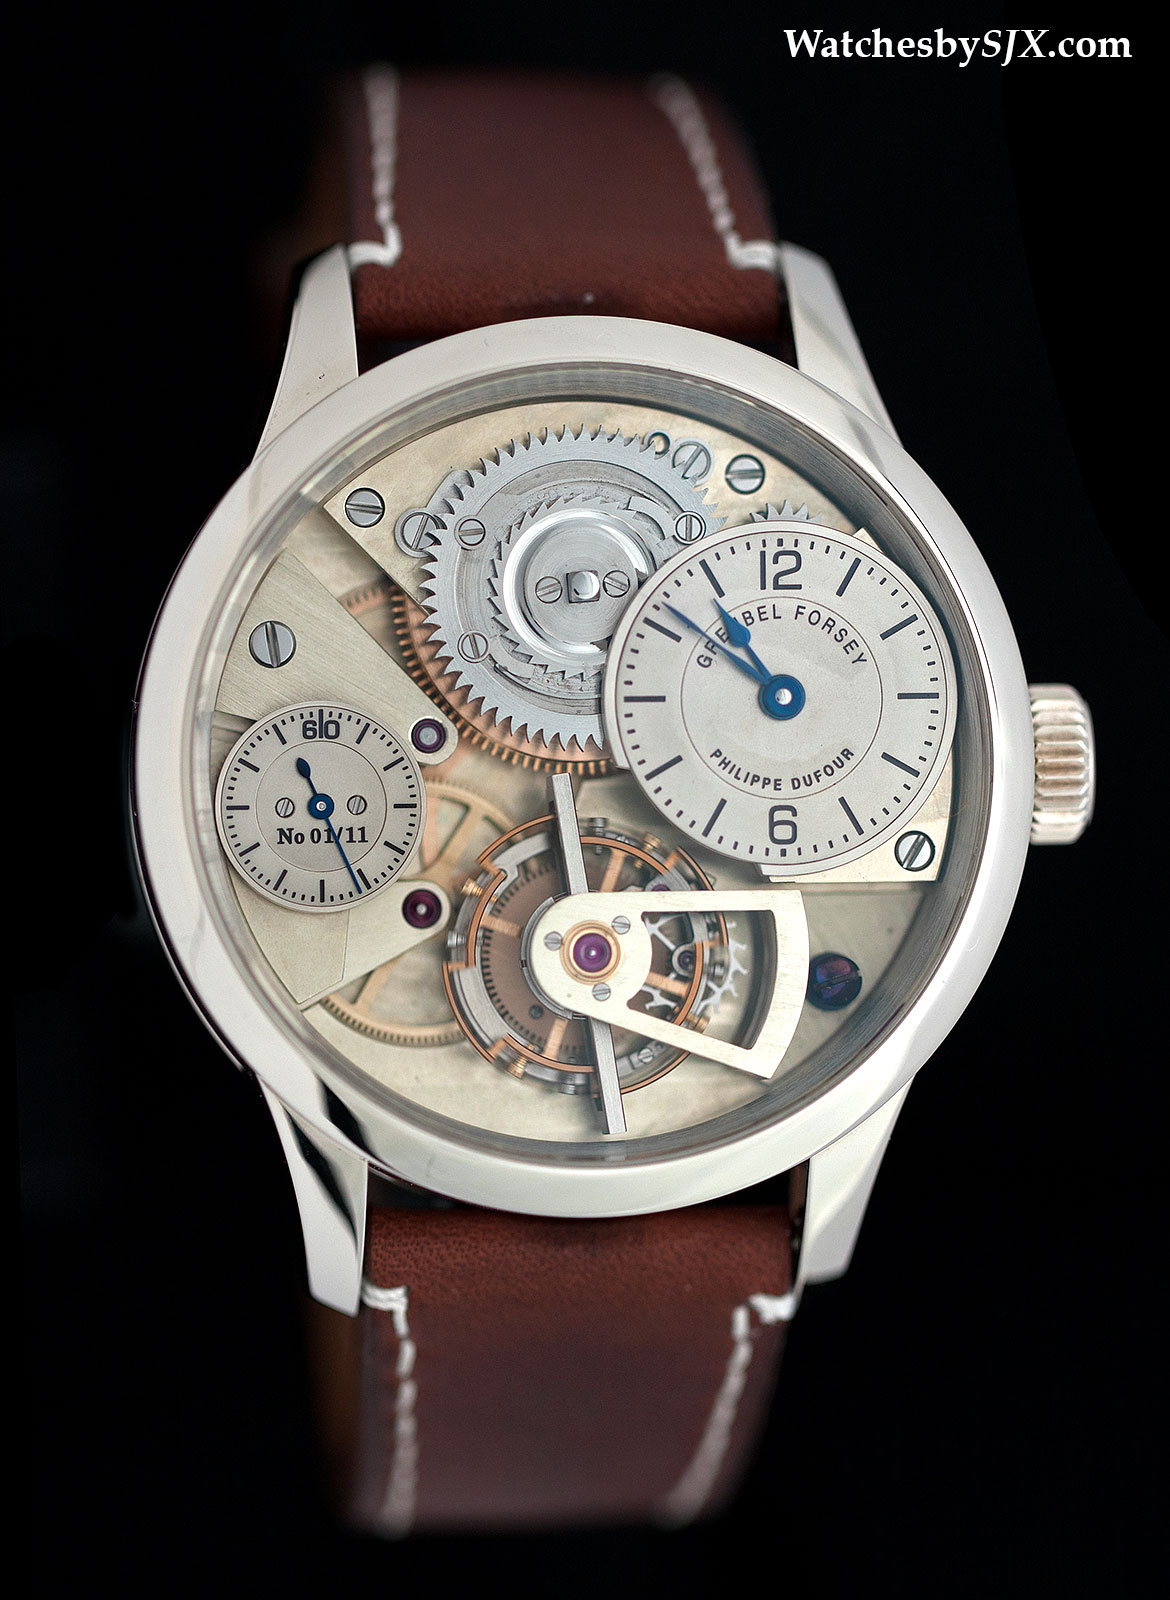 The "Montre École" prototype, sold at Christies for close to 1.5 million USD.